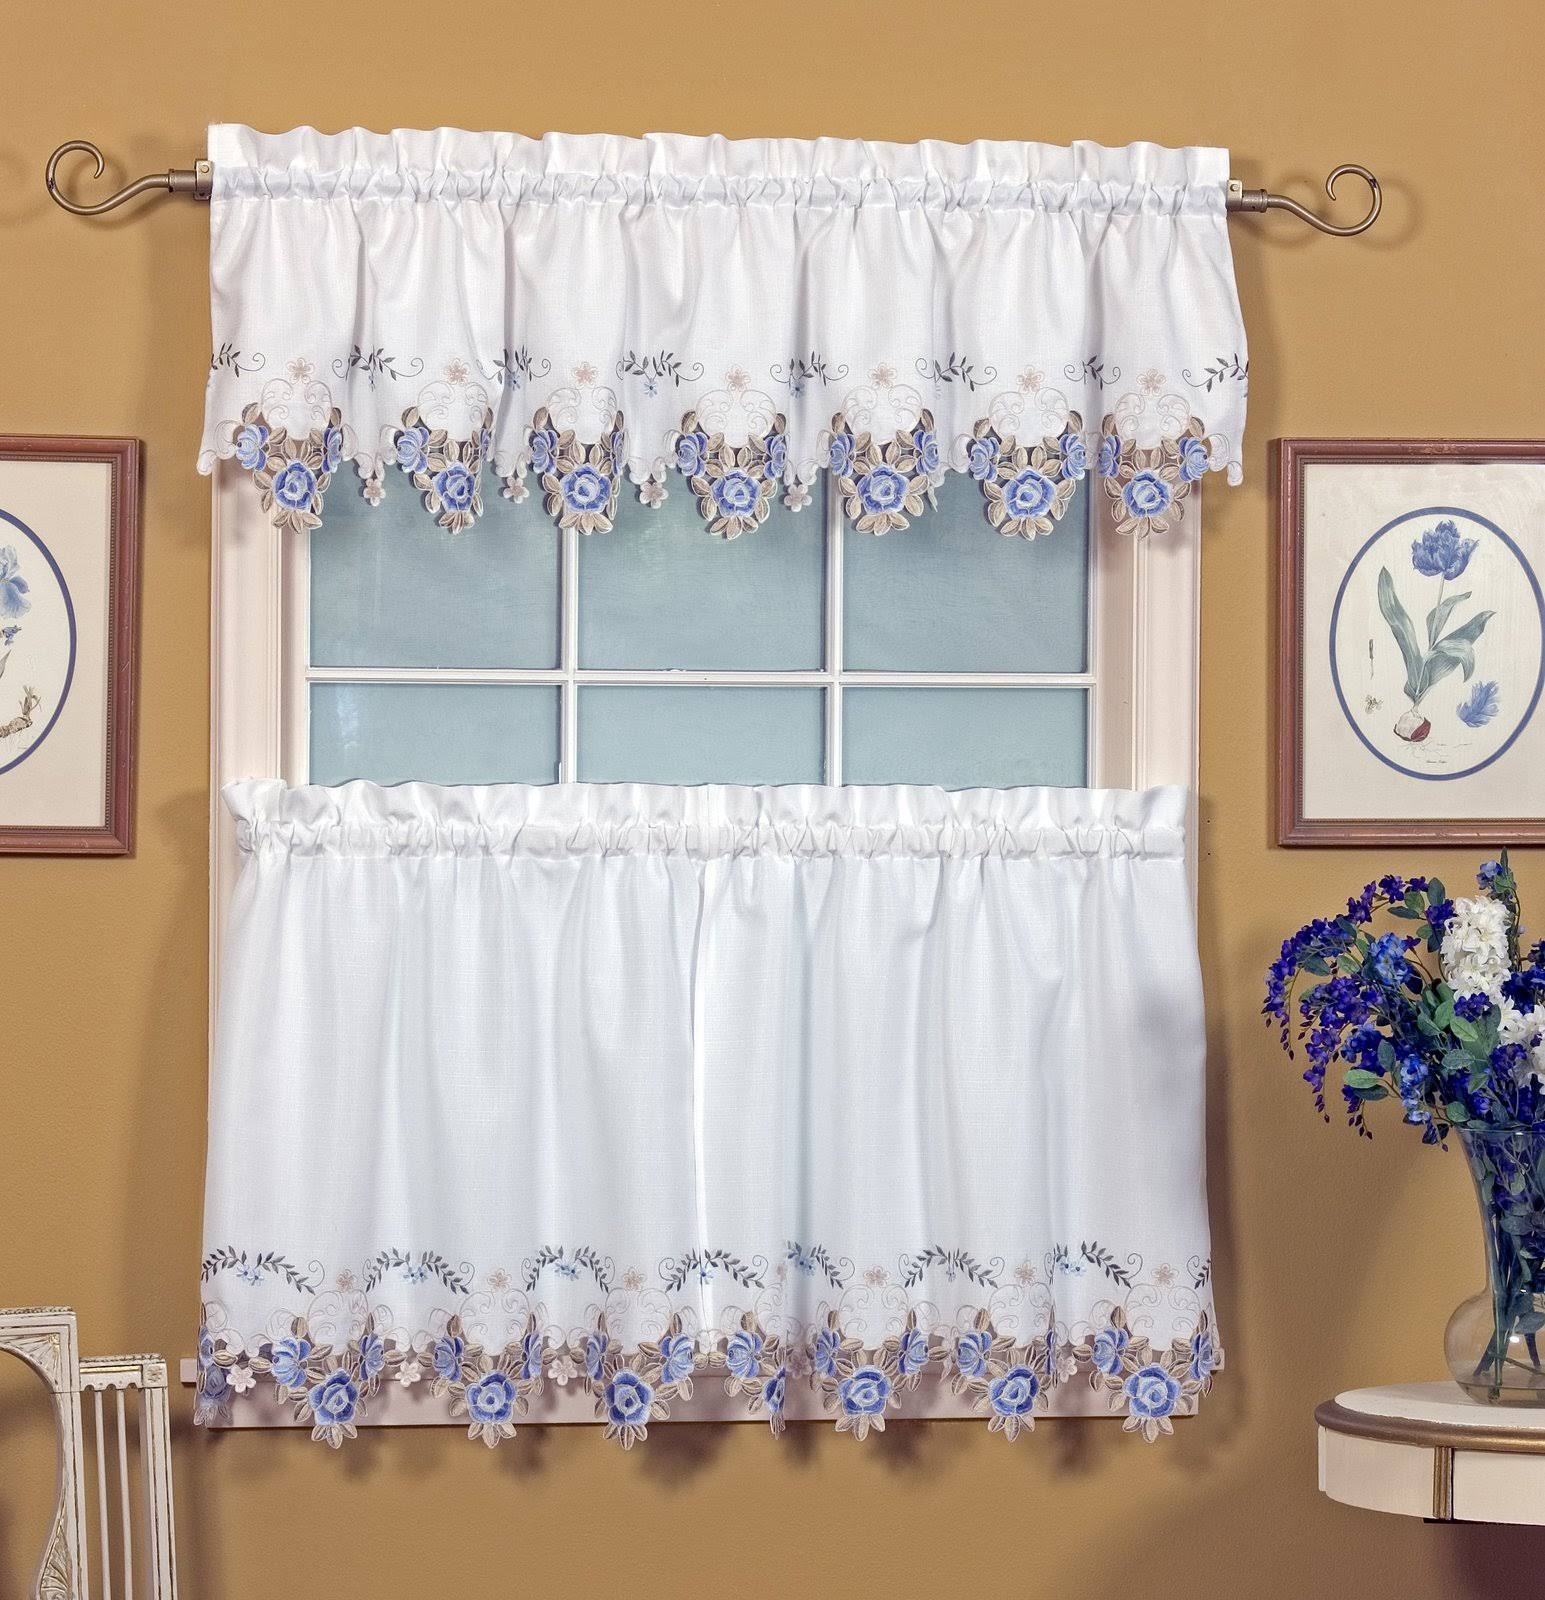 Today's Curtain Verona Reverse Embroidery Valance, 14-Inch, White/Blue